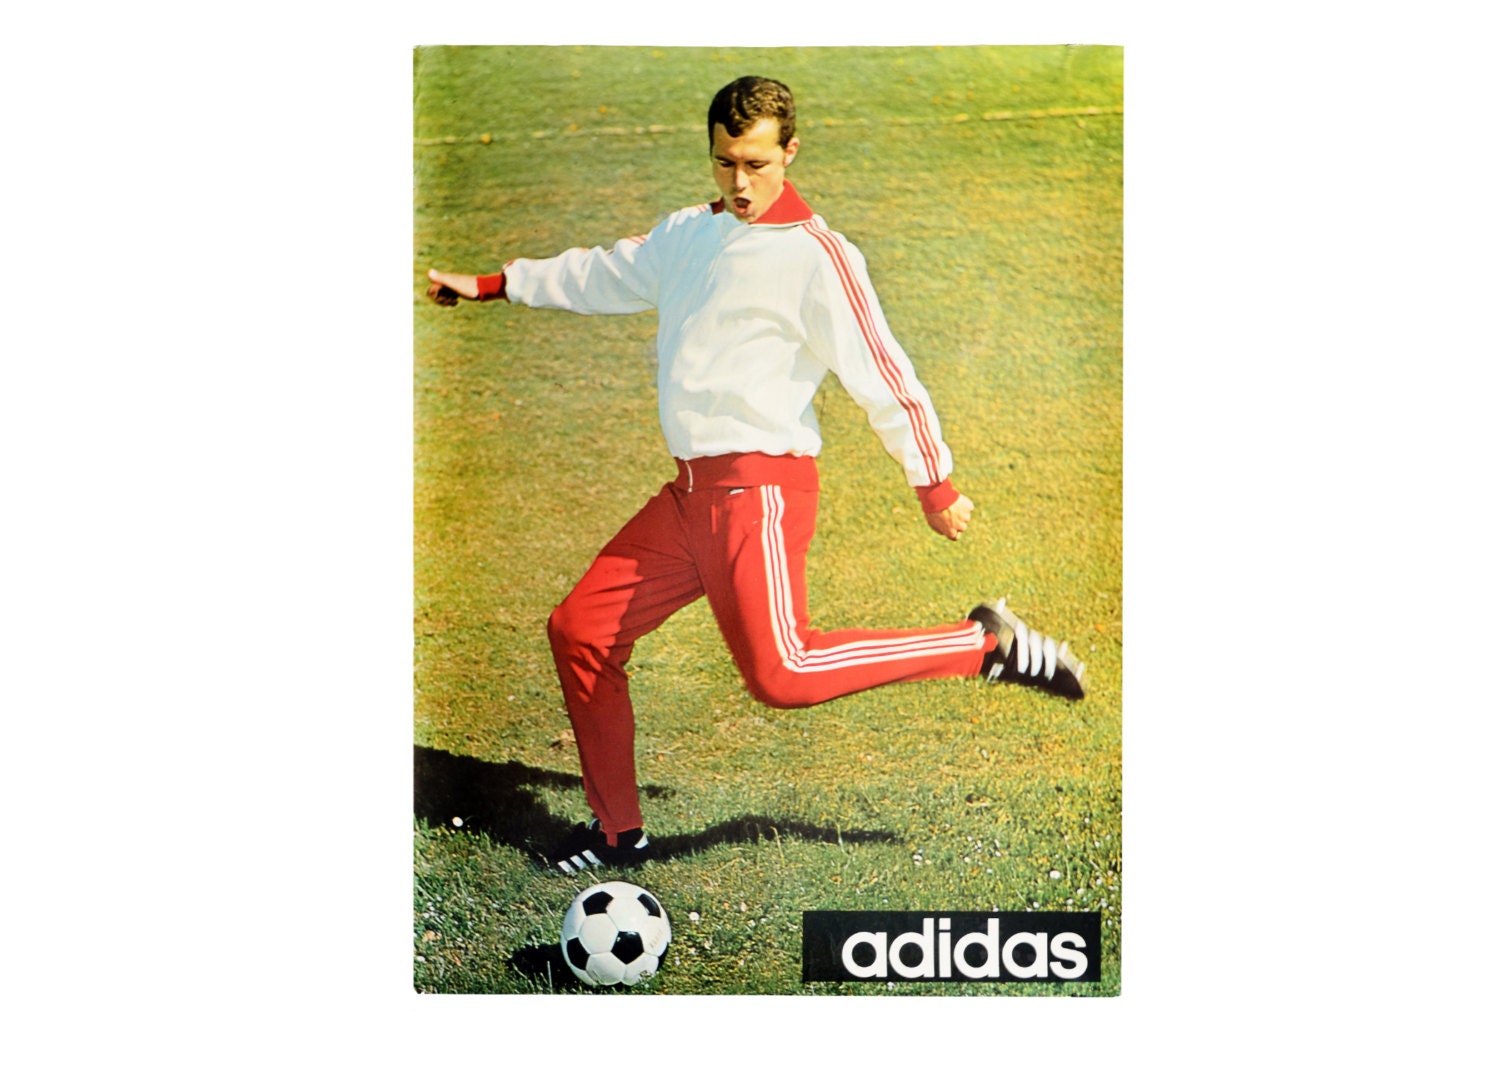 Vintage Adidas White & Red Jumpsuit Cleats Ad Poster Printed - Etsy